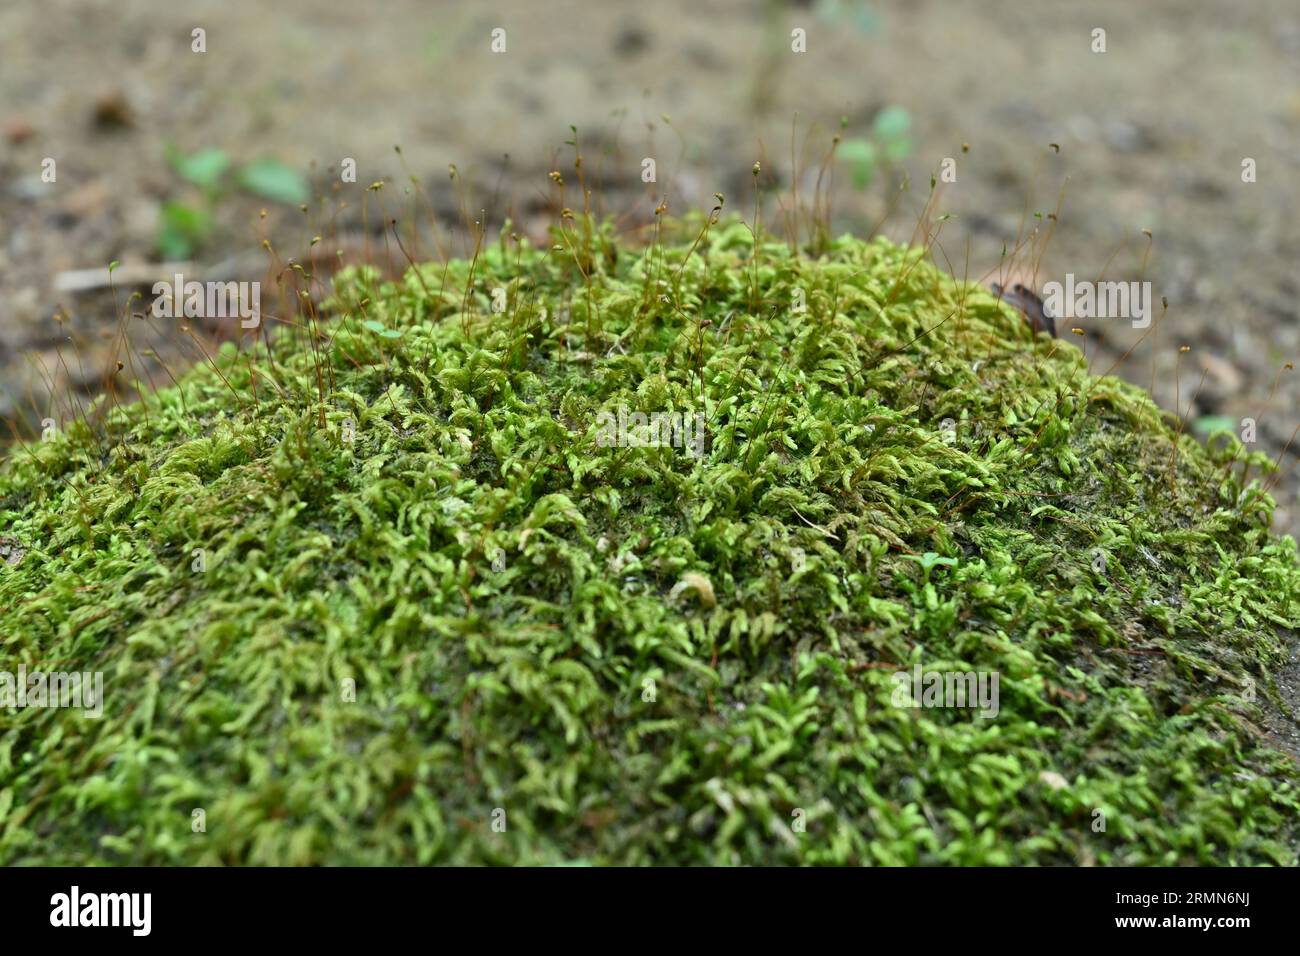 View of the green Mosses growing on top of the surface of a rock with the moss spores Stock Photo